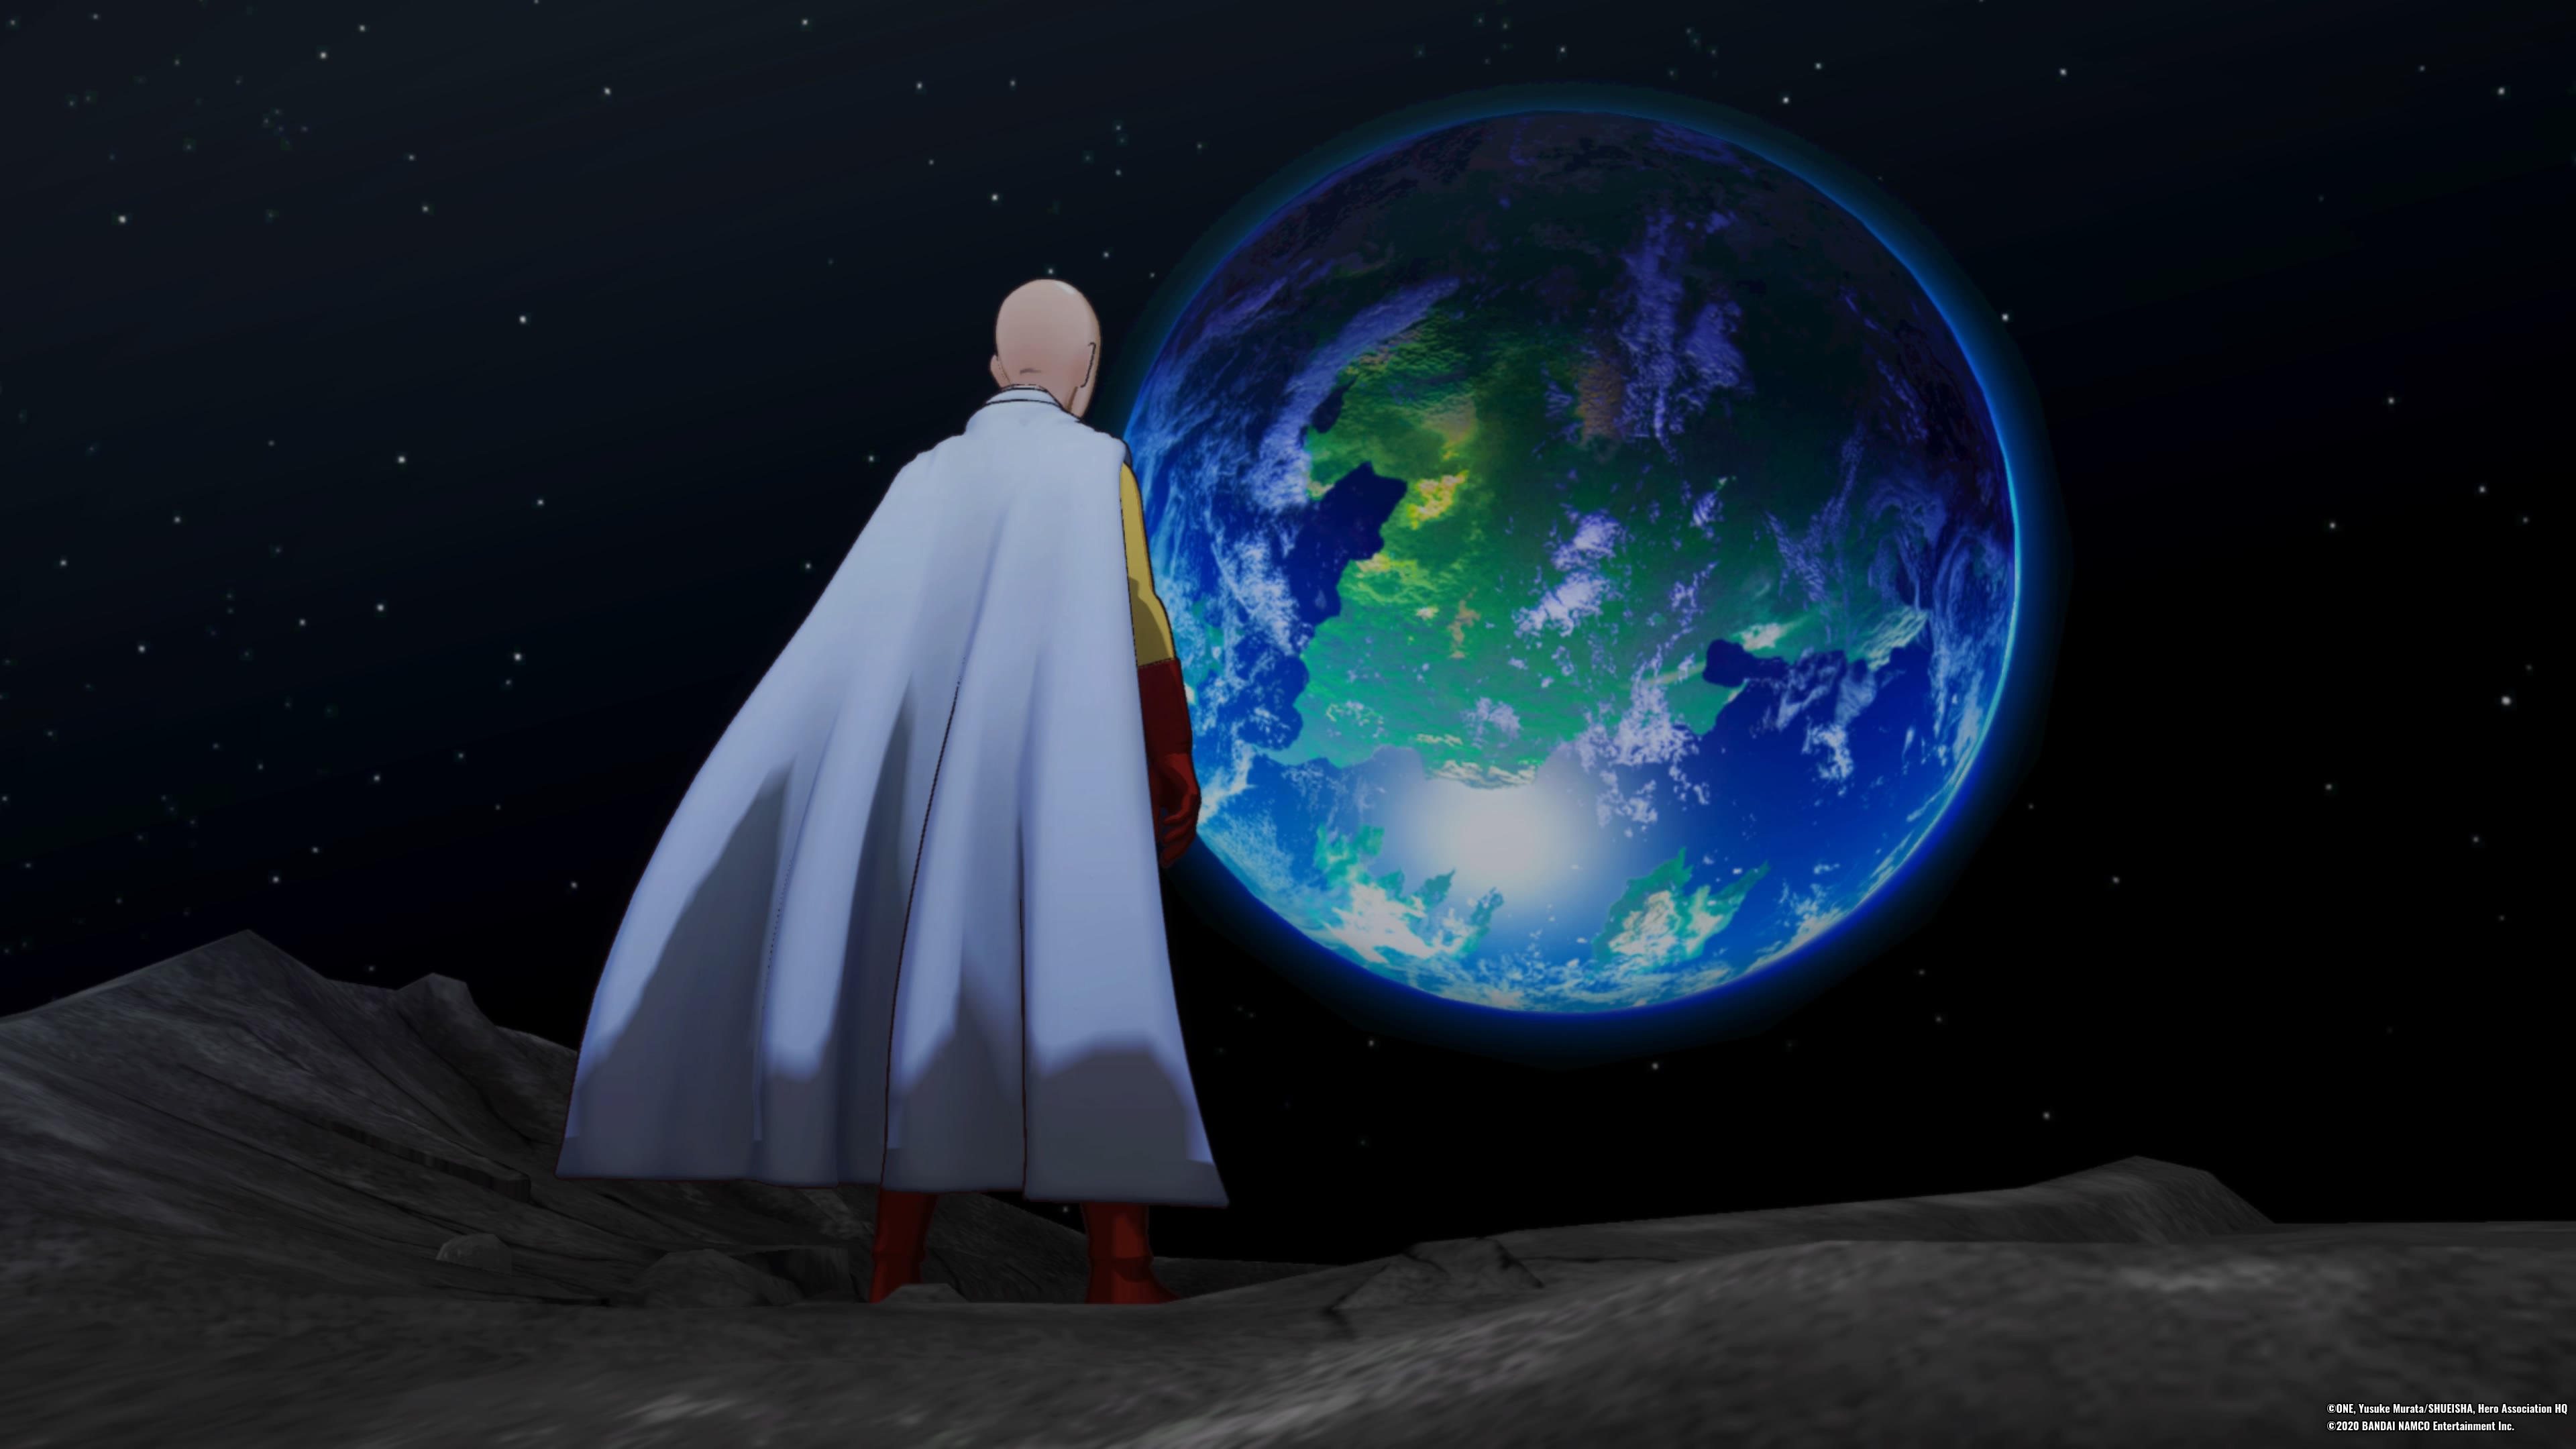 One Punch Man 9